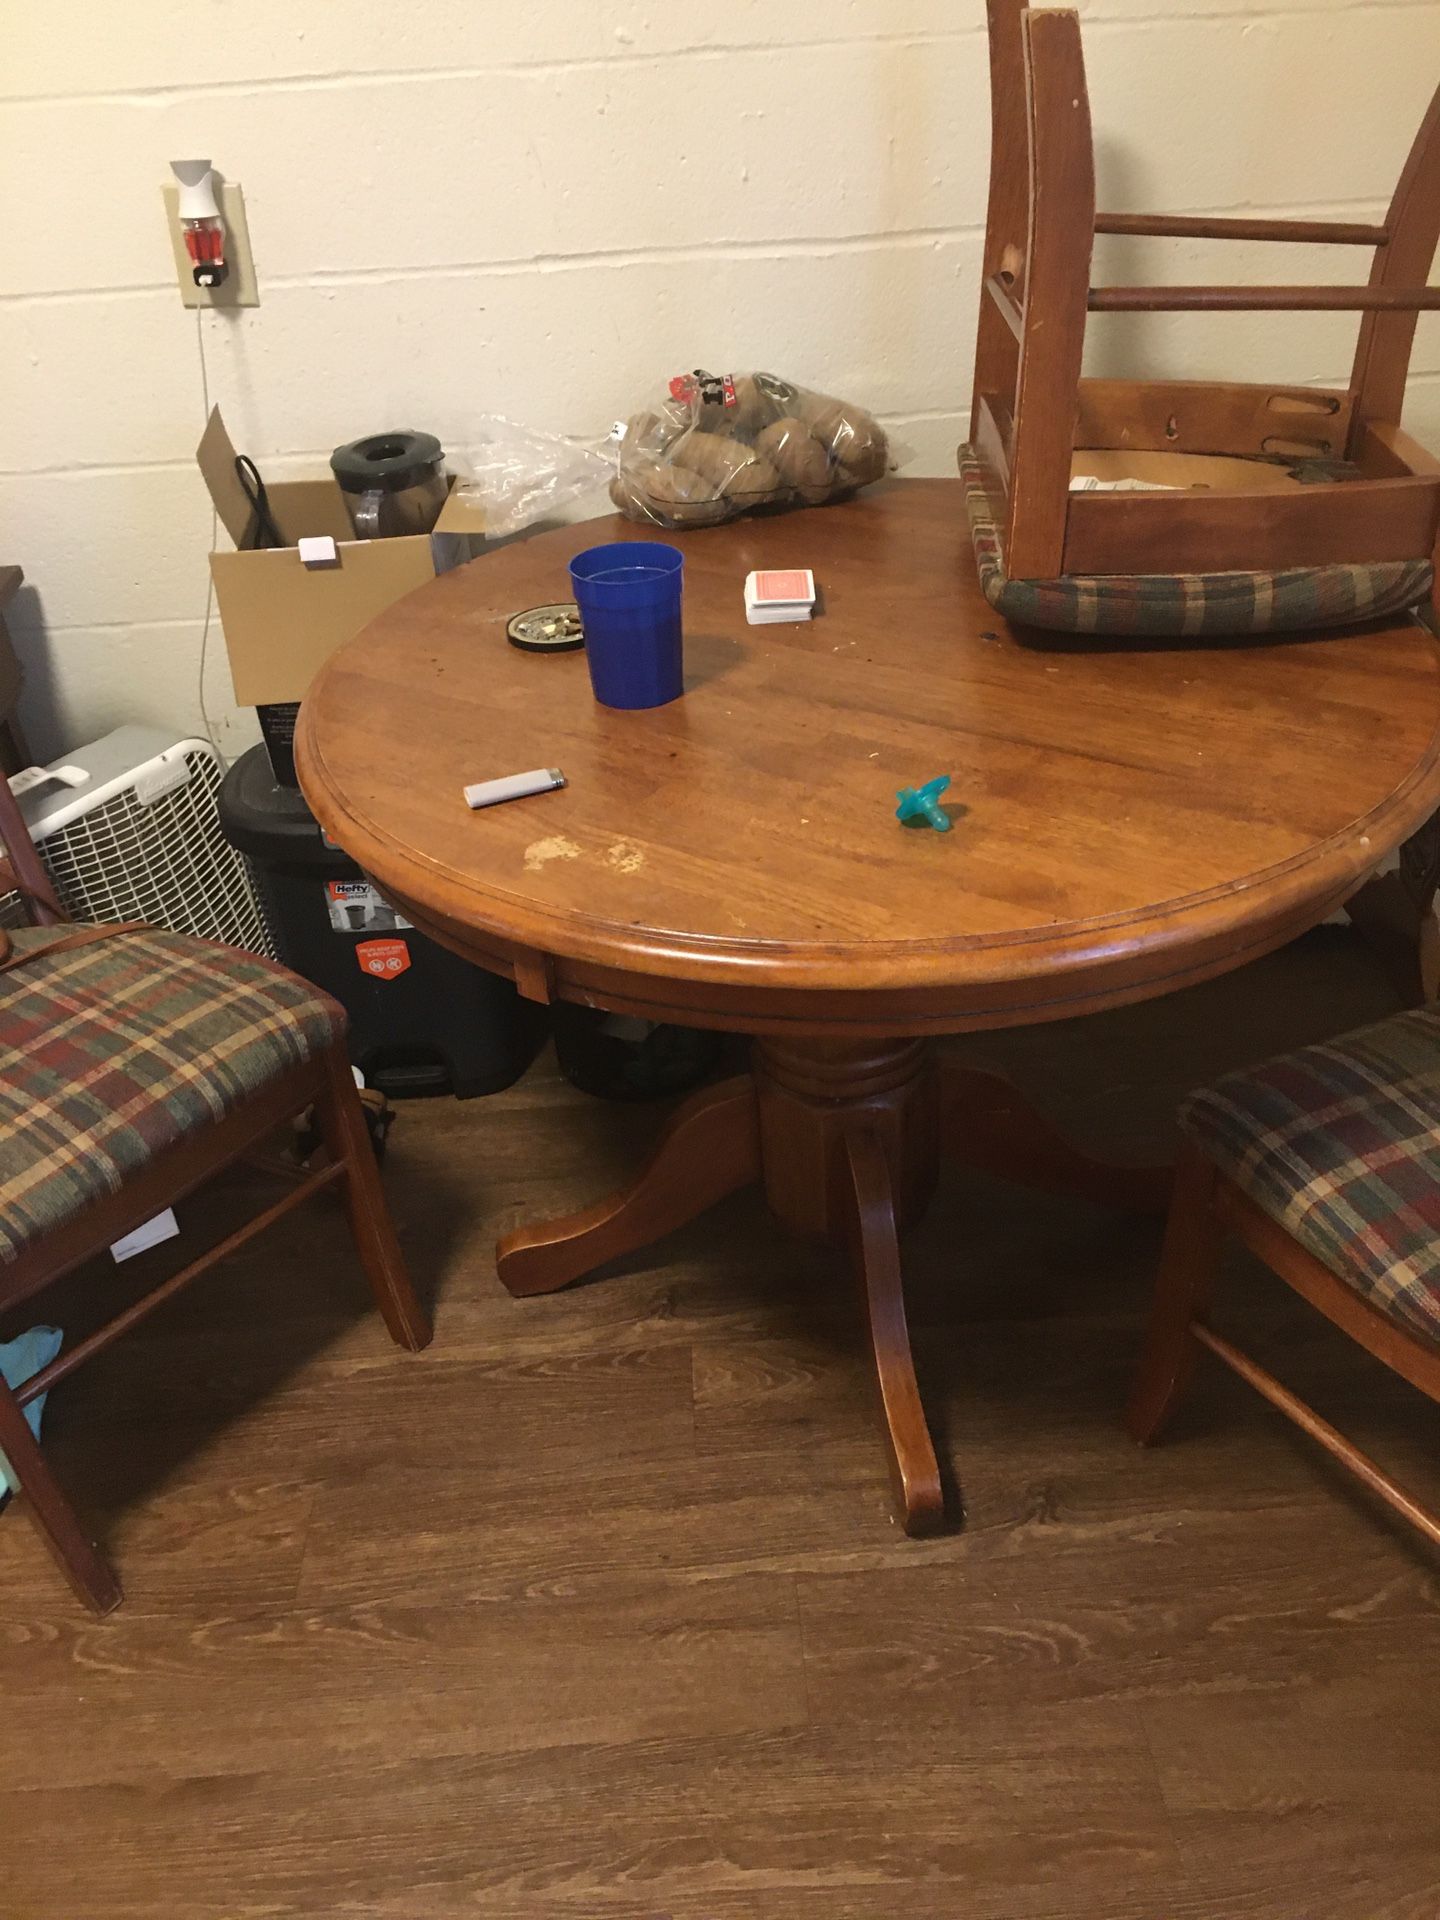 Couches and table